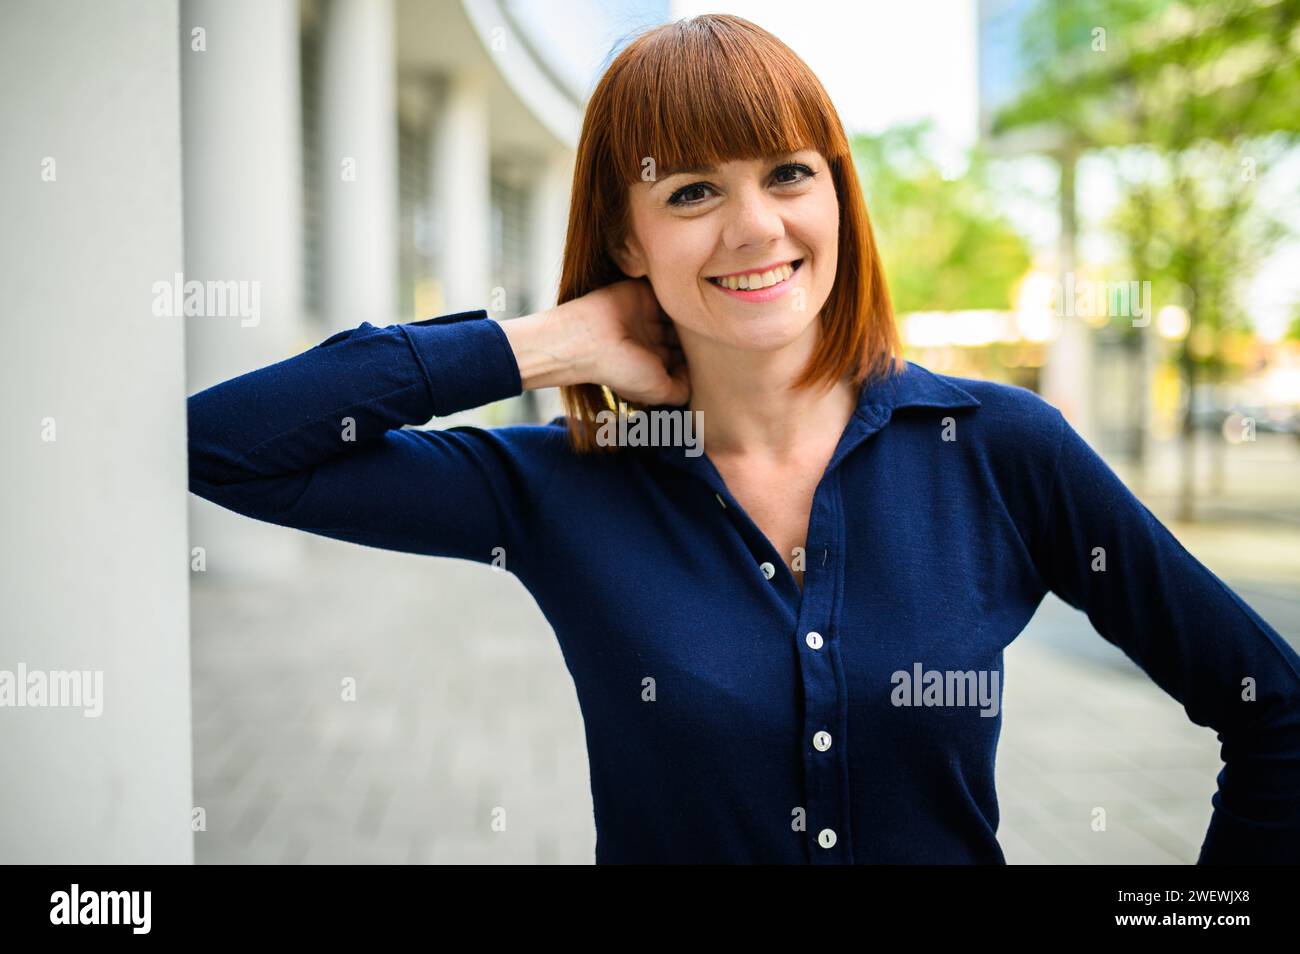 Attractive confident caucasian woman with casual clothing and elegant blouse. Smiling joyfully outdoors in an urban background Stock Photo